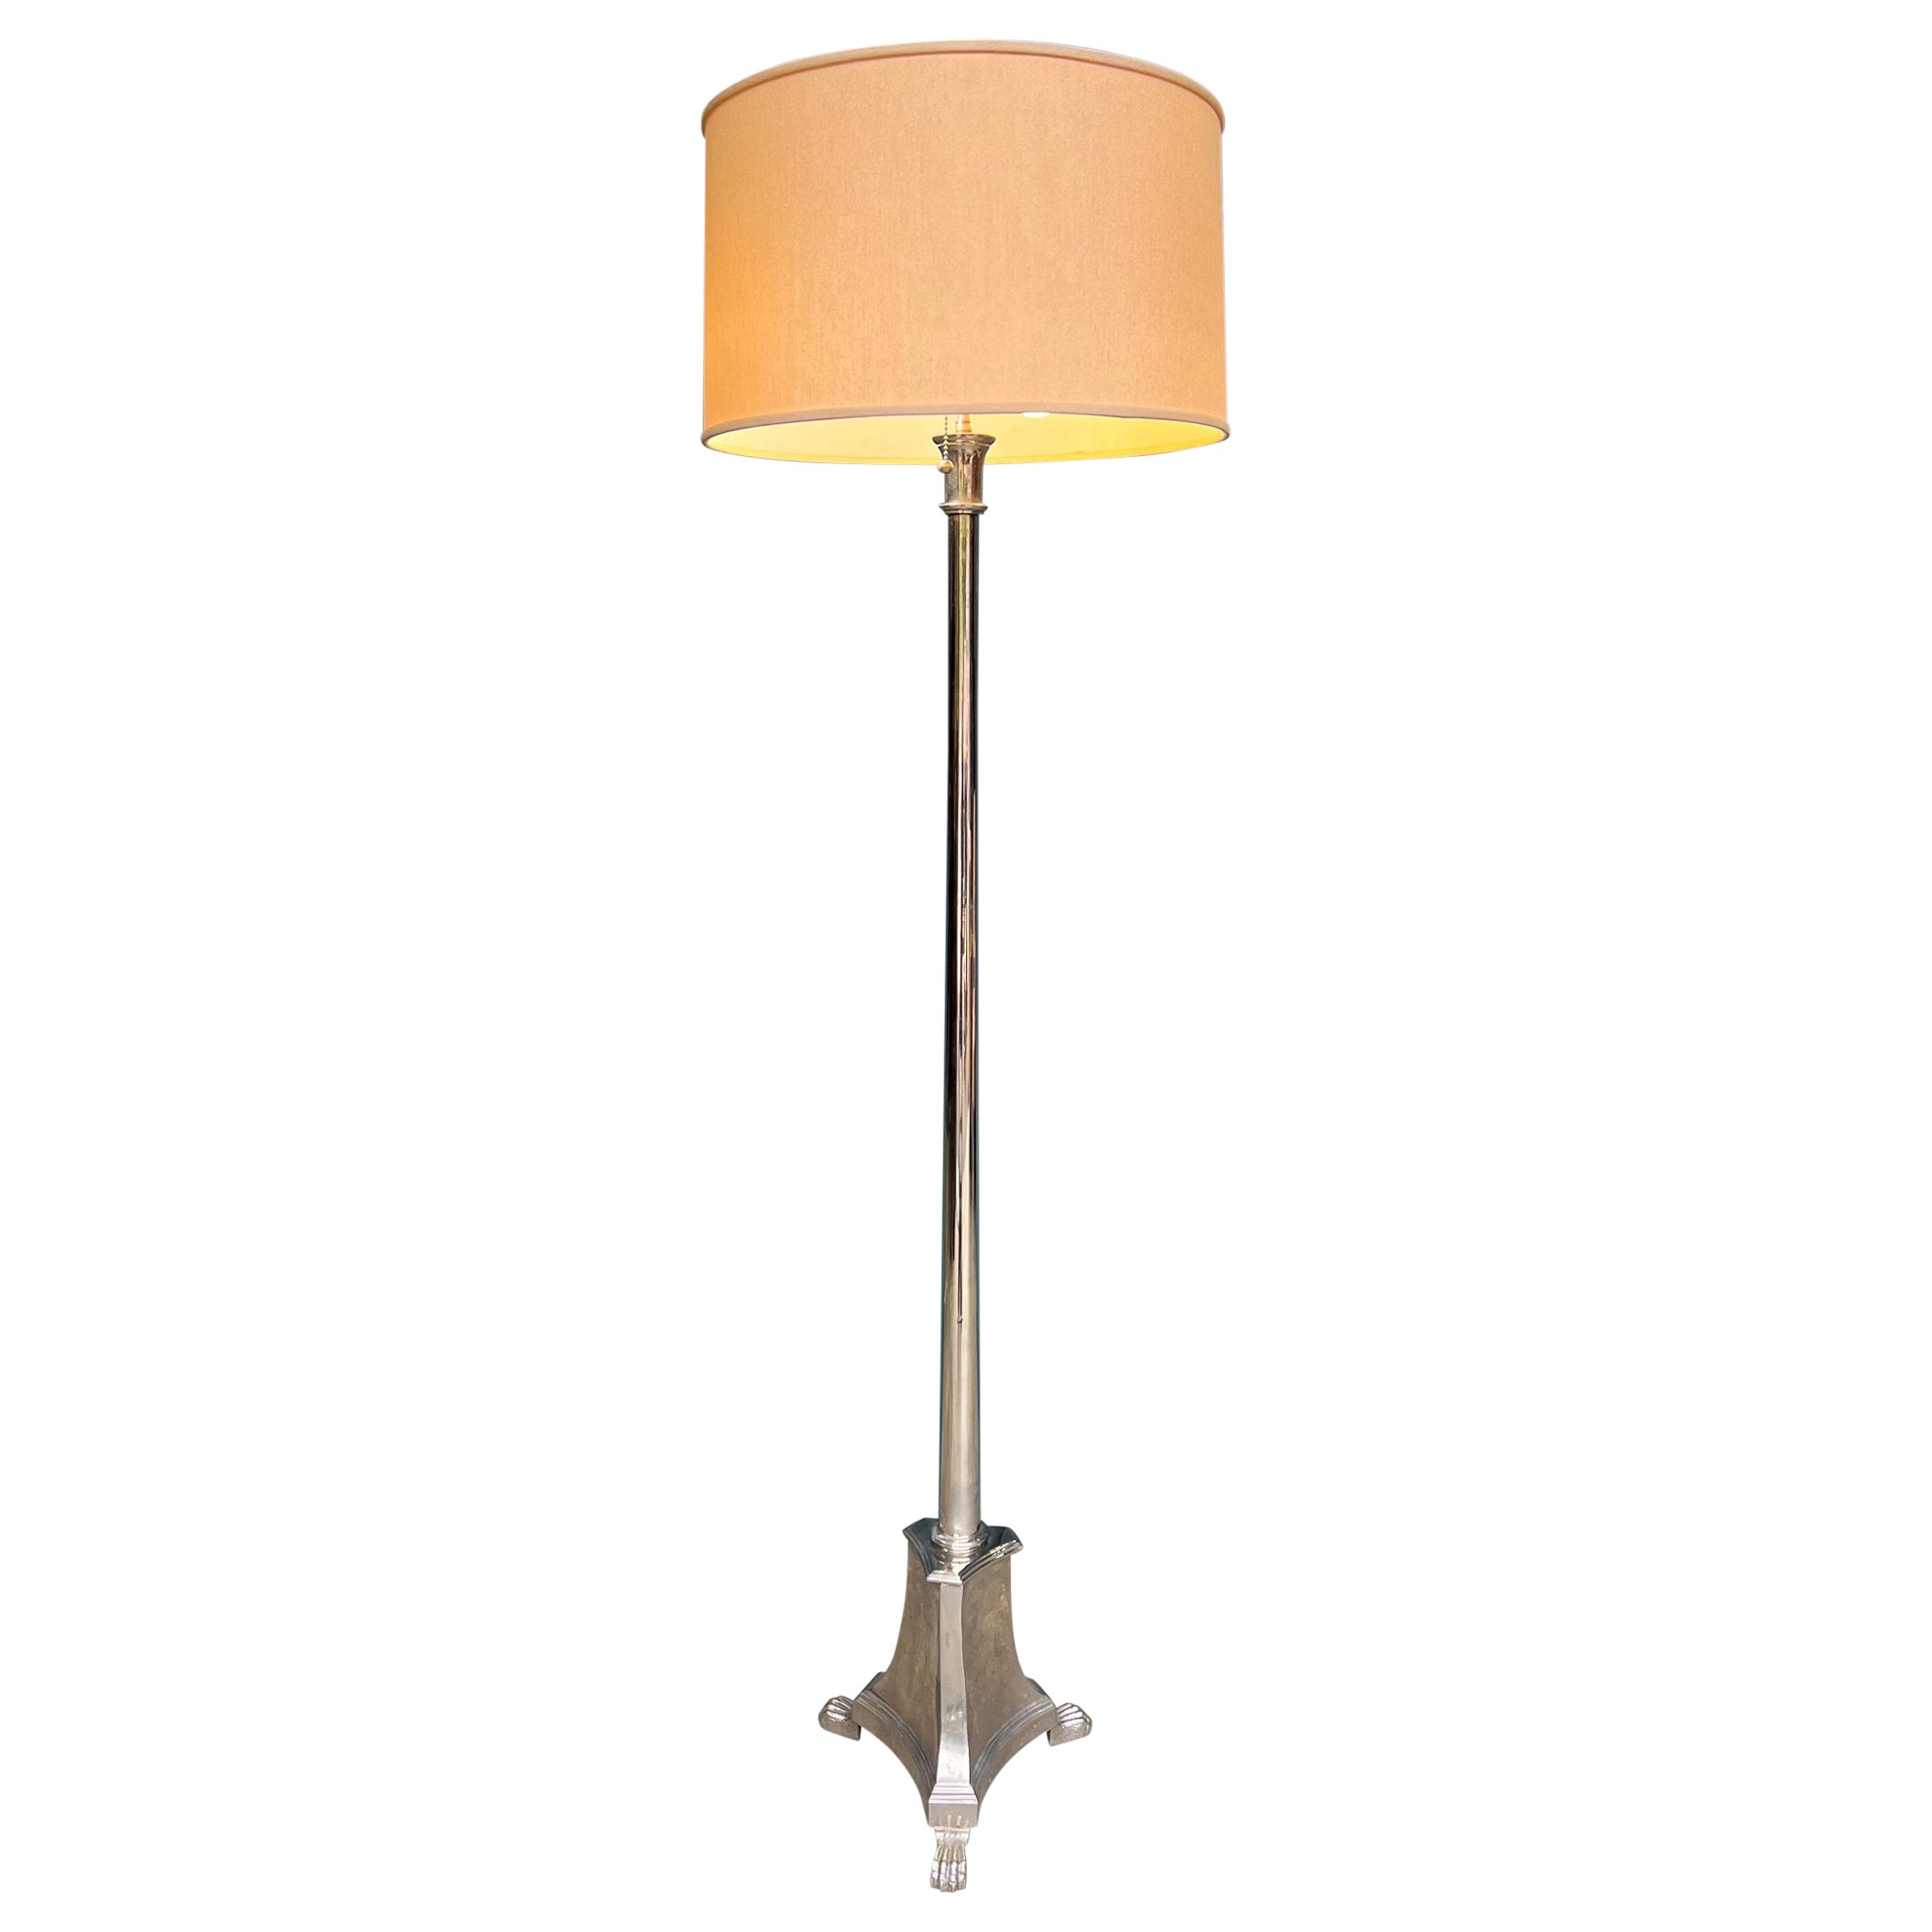 French 1940s Neoclassical Style Nickel-Plated Floor Lamp